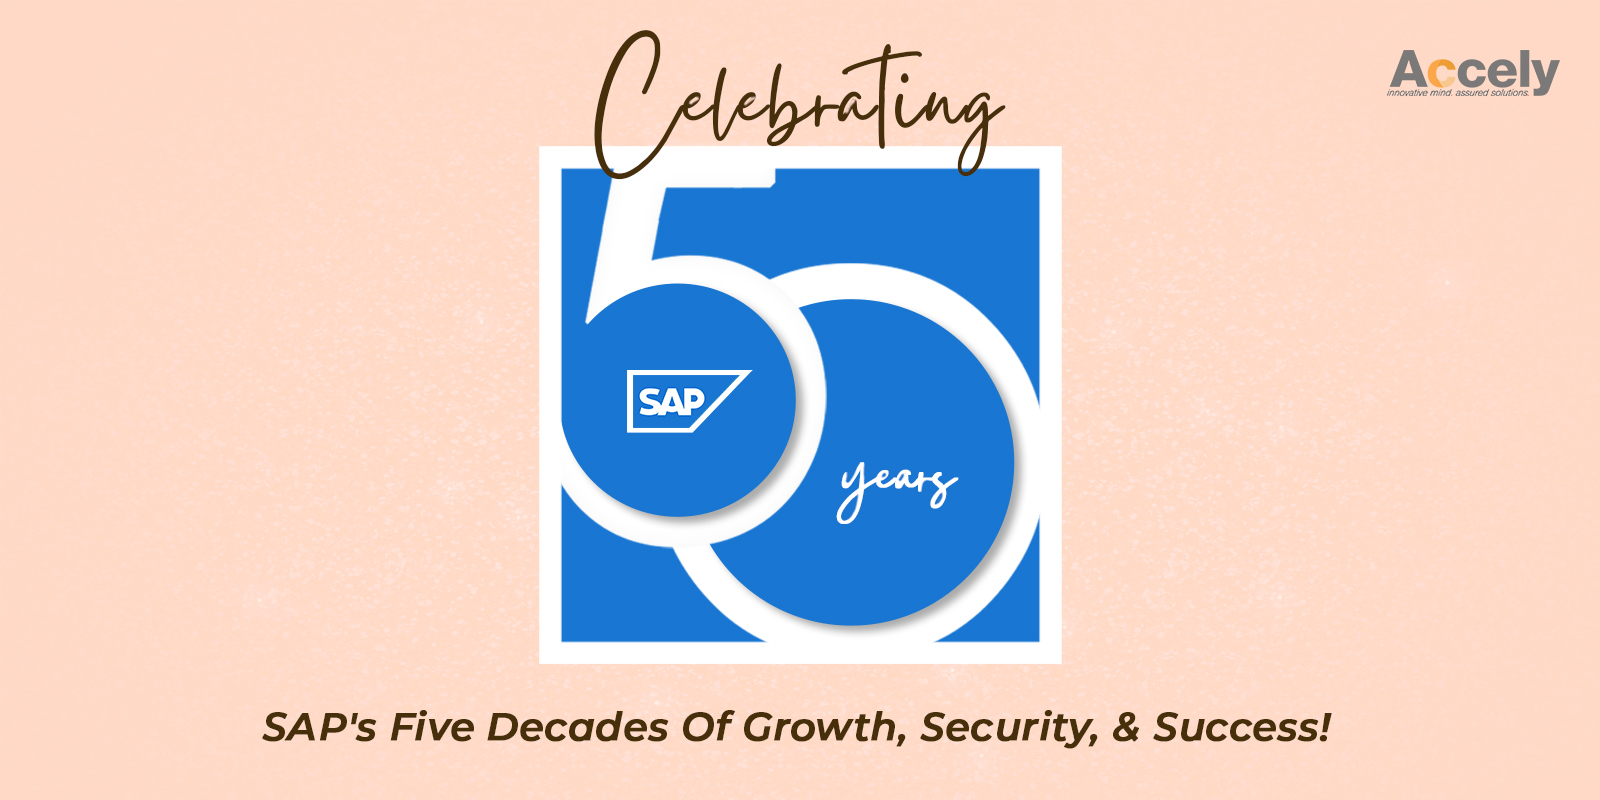 Celebrating SAP's Five Decades Of Growth, Security, & Success